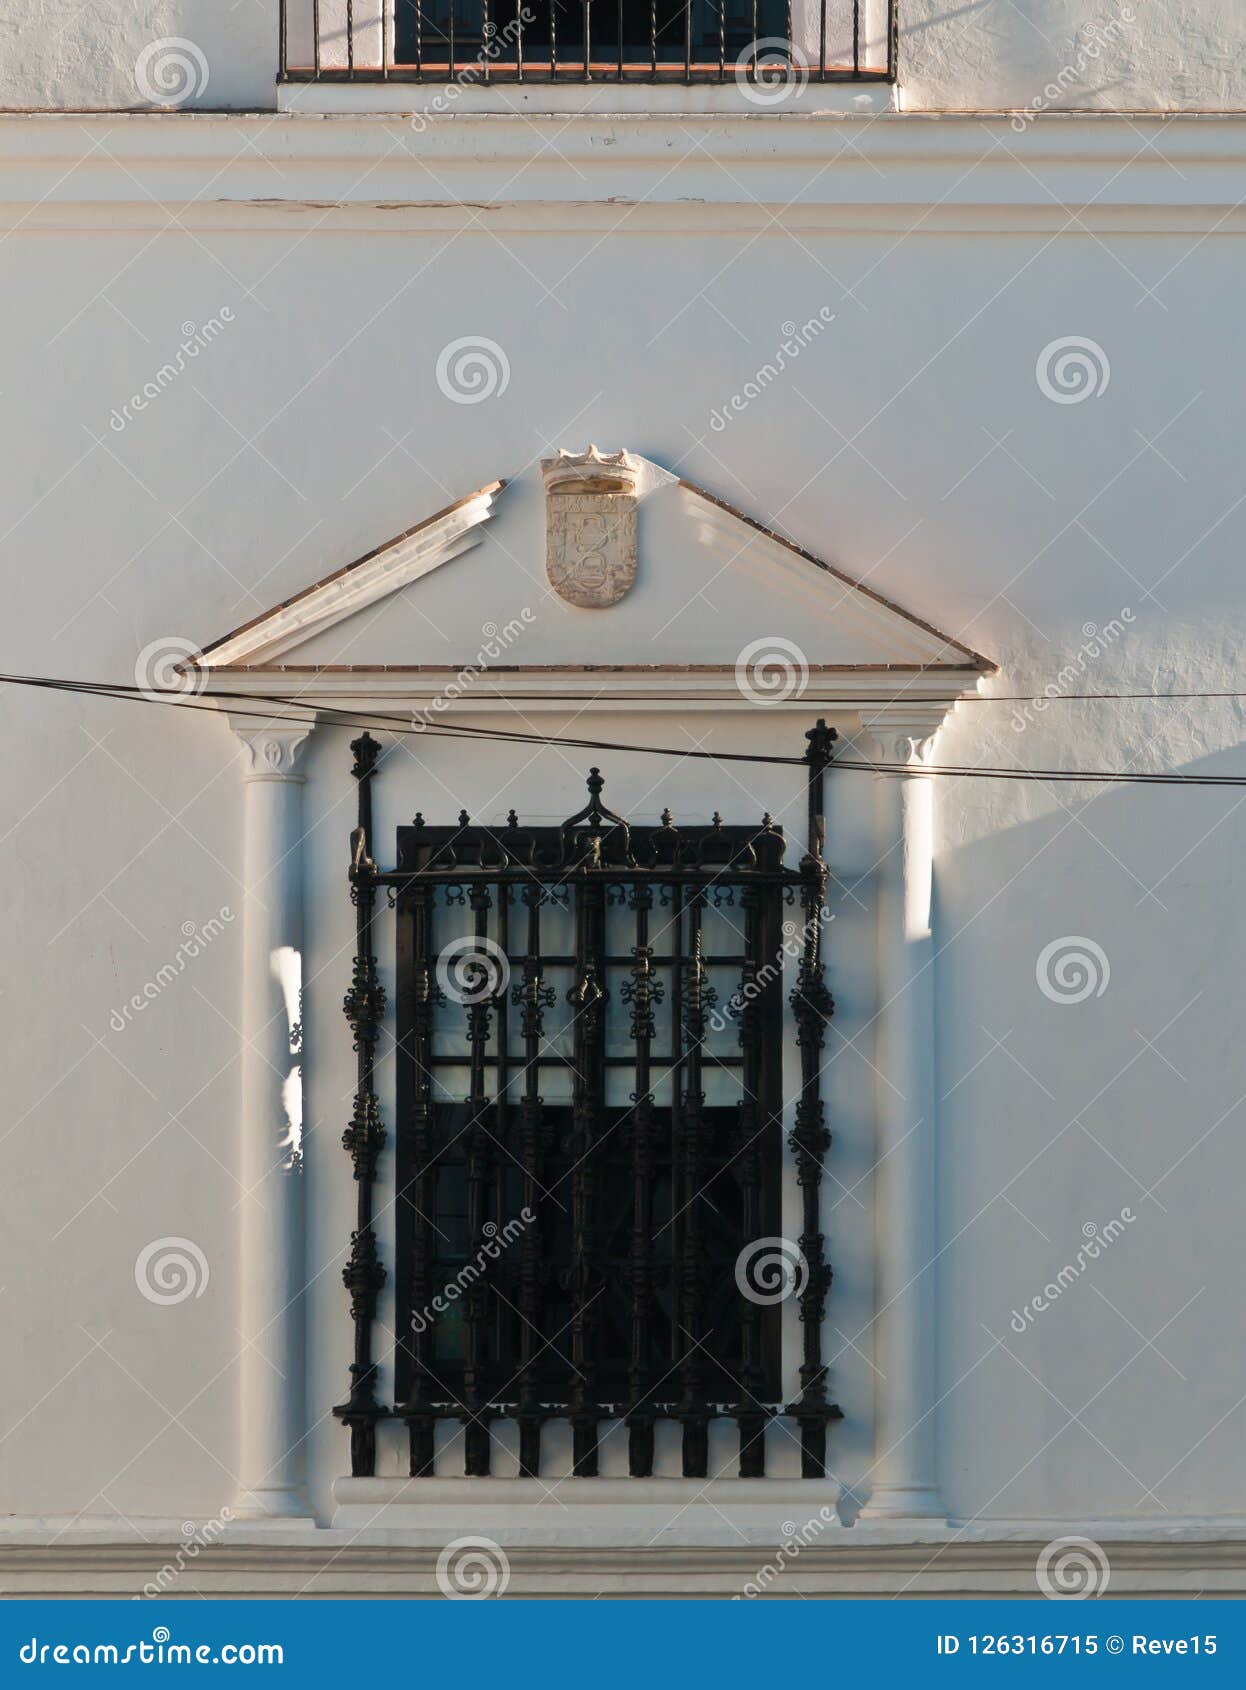 Wrought Iron Window Protection On A Spanish Public Building Stock Image -  Image Of Front, City: 126316715